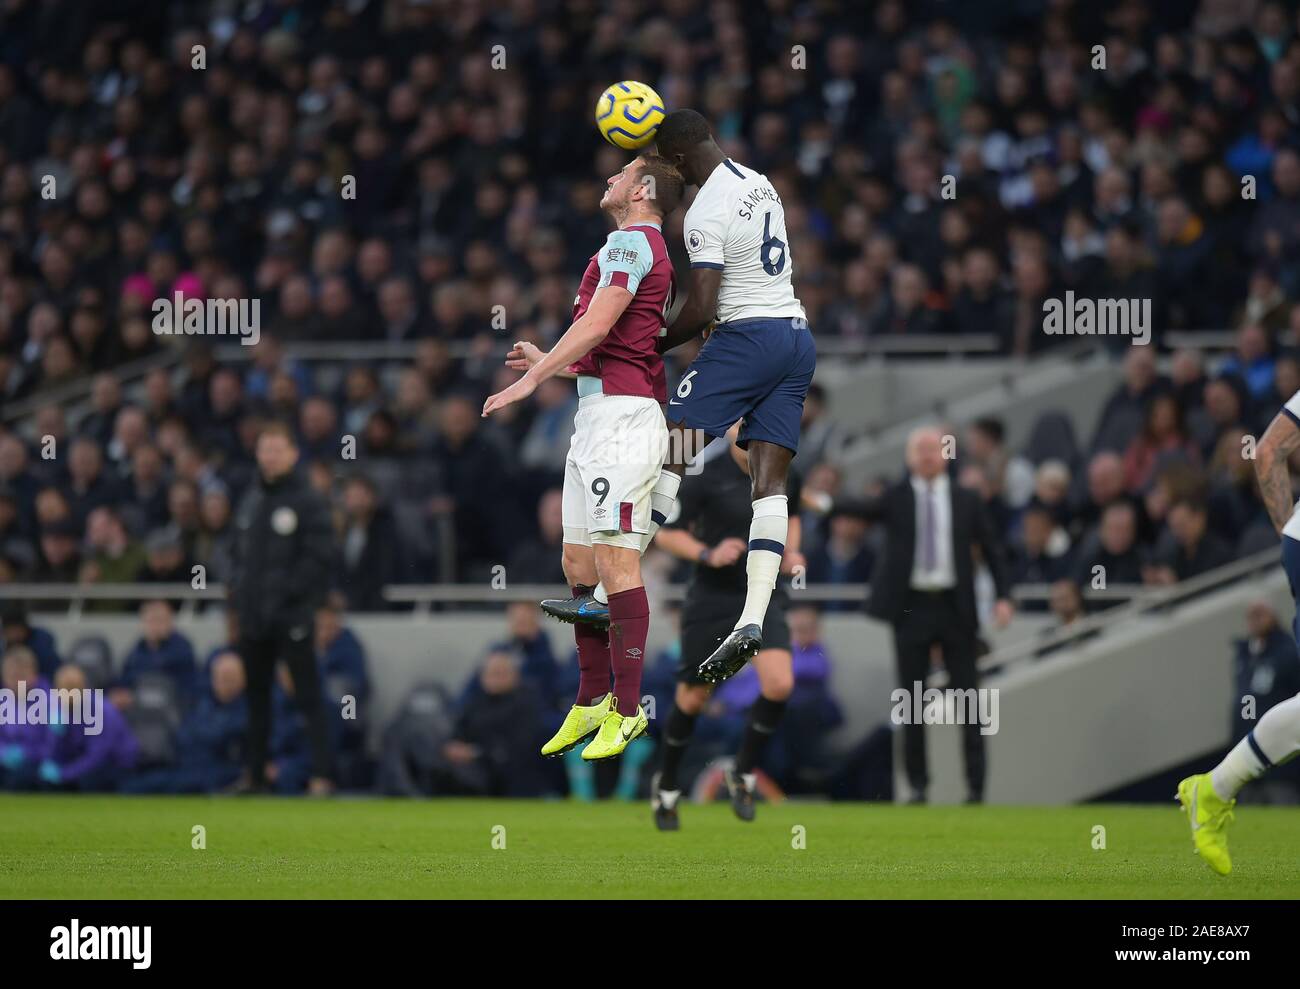 London, UK. 7th December 2019. Davinson Sanchez of Tottenham Hotspur and Chris Wood of Burnley during the Tottenham Hotspur vs Burnley Premier League Football match at the Tottenham Hotspur Stadium on 7th December 2019-EDITORIAL USE ONLY No use with unauthorised audio, video, data, fixture lists (outside the EU), club/league logos or 'live' services. Online in-match use limited to 45 images (+15 in extra time). No use to emulate moving images. No use in betting, games or single club/league/player publications/services- Credit: Martin Dalton/Alamy Live News Stock Photo